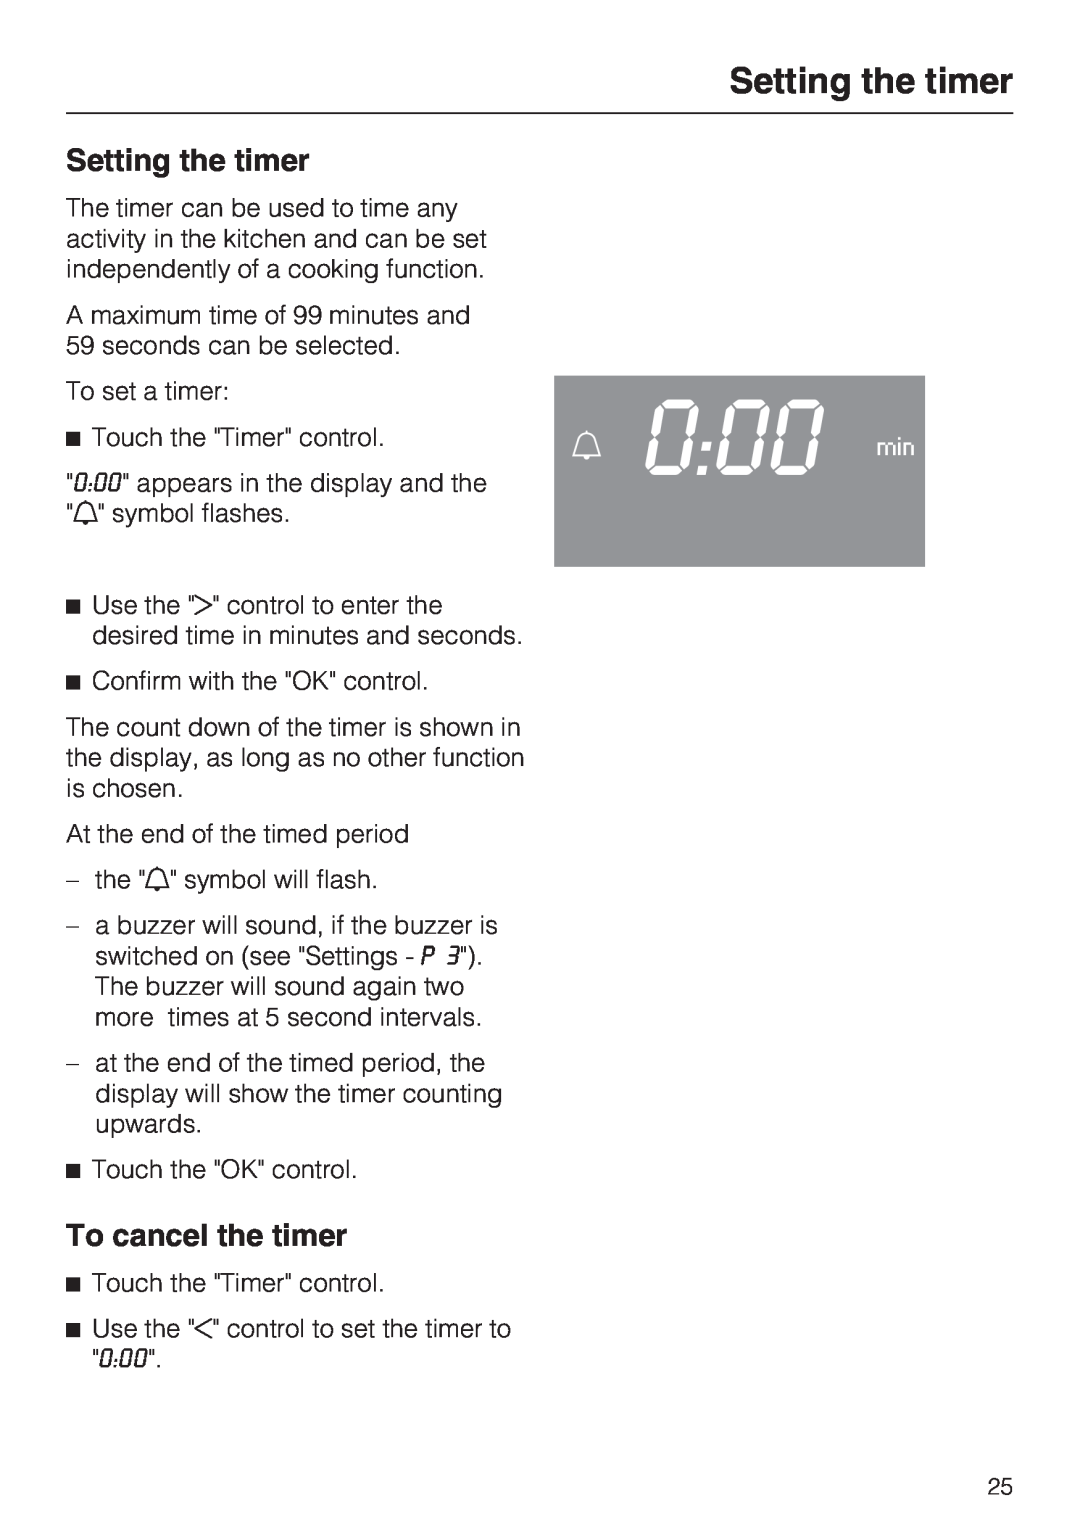 Miele H4842BP installation instructions 0:00 min, Setting the timer, To cancel the timer 